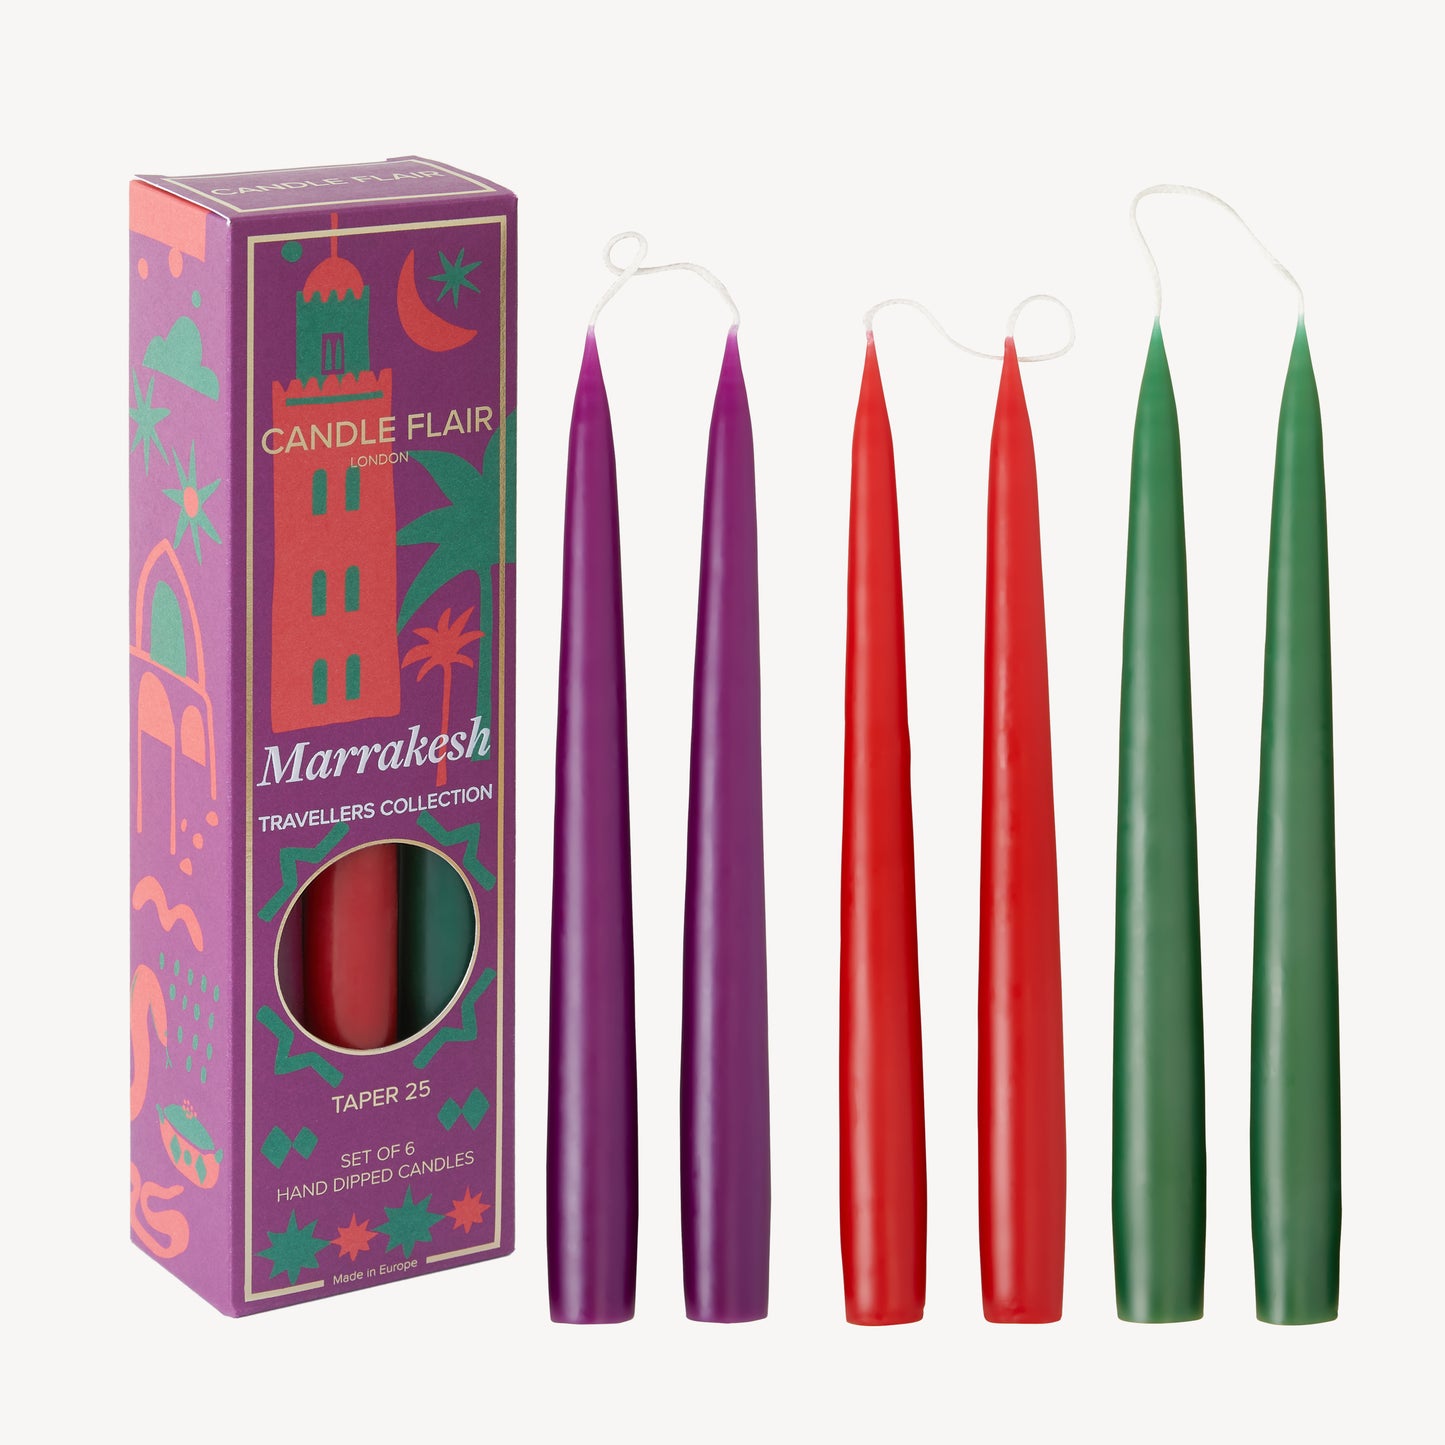 Taper Candle Gift Box by Candle Flair - Traveller Collection Marrakesh